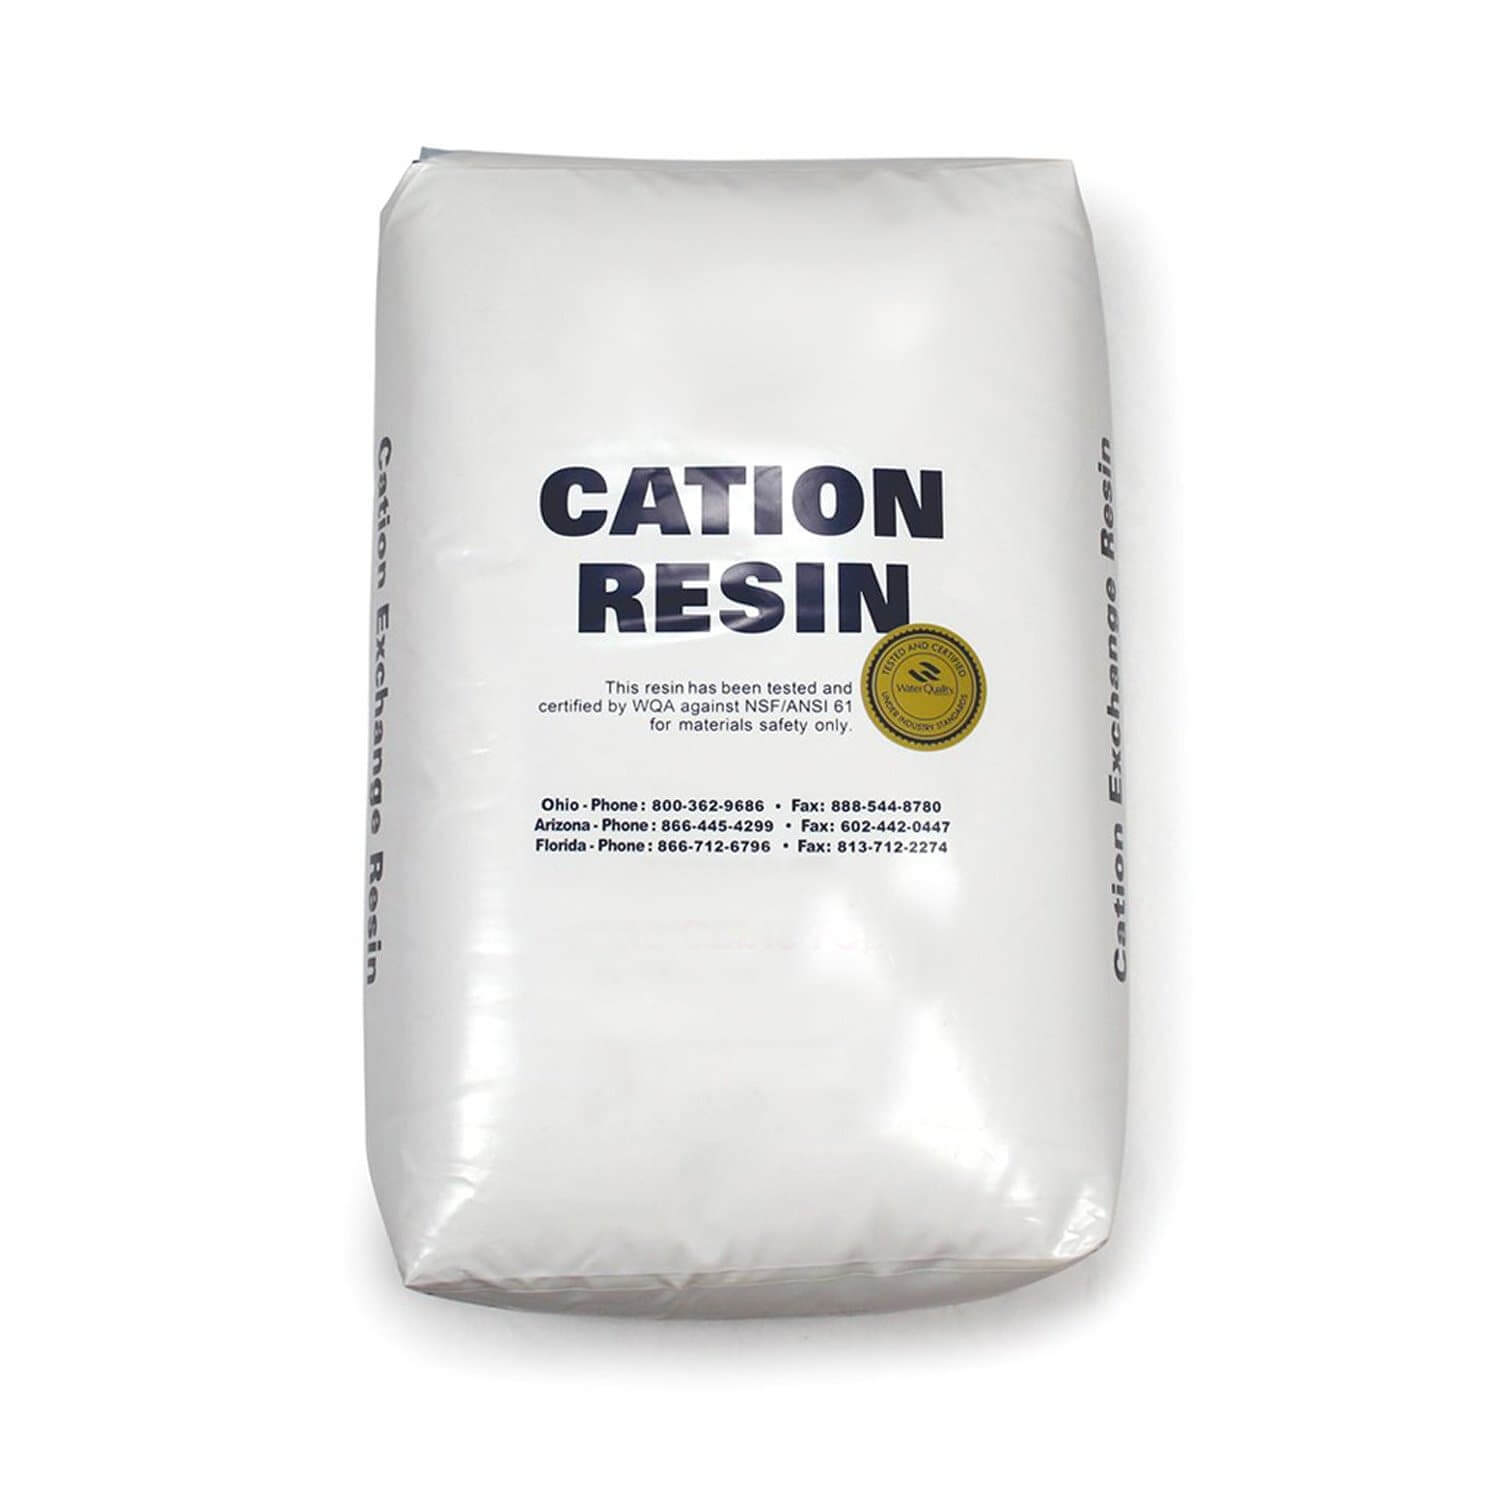 10% Cation Resin, Premium Crosslink - Quality Water Treatment